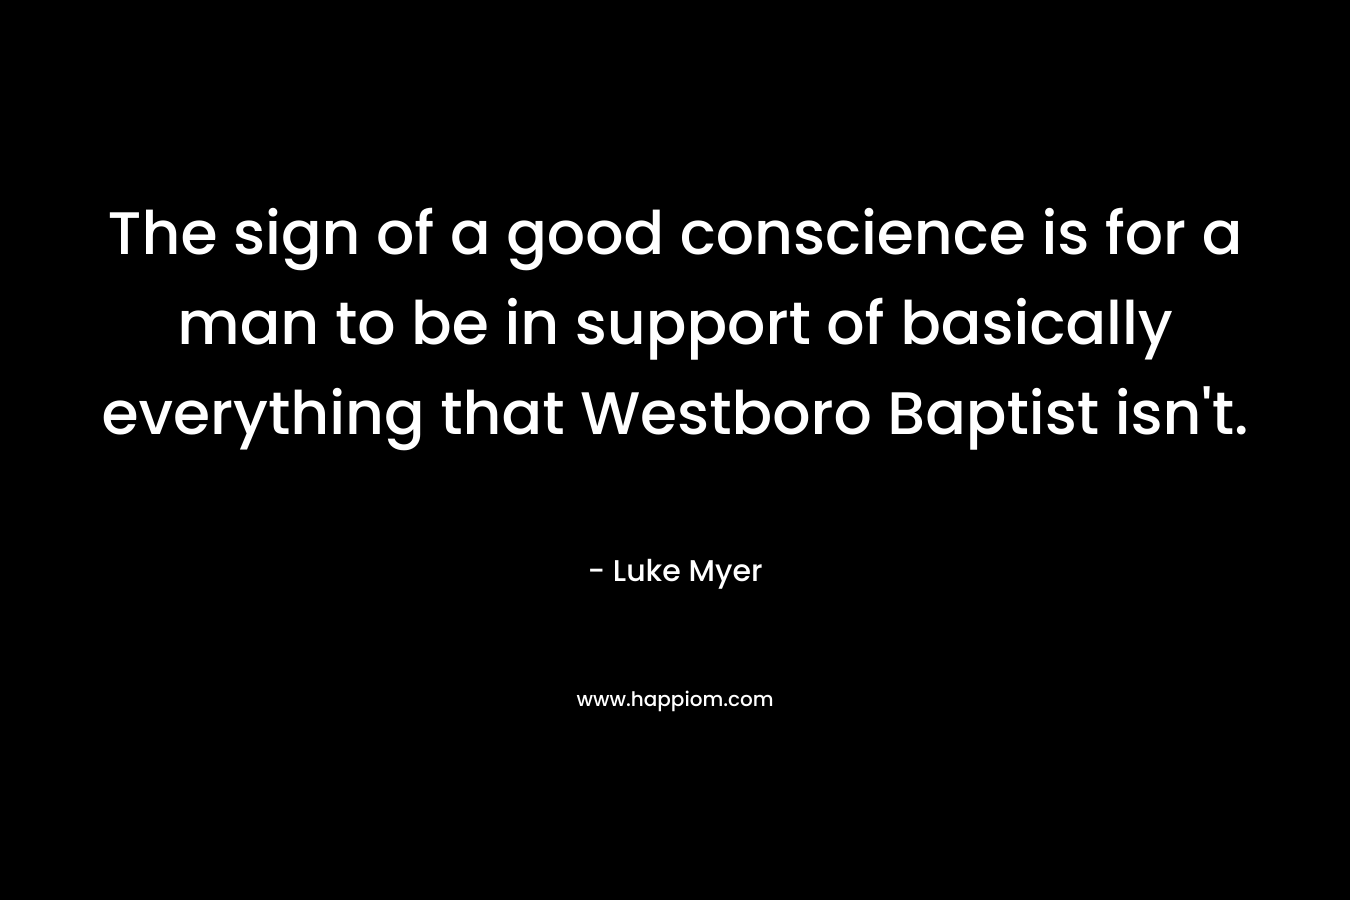 The sign of a good conscience is for a man to be in support of basically everything that Westboro Baptist isn’t. – Luke Myer